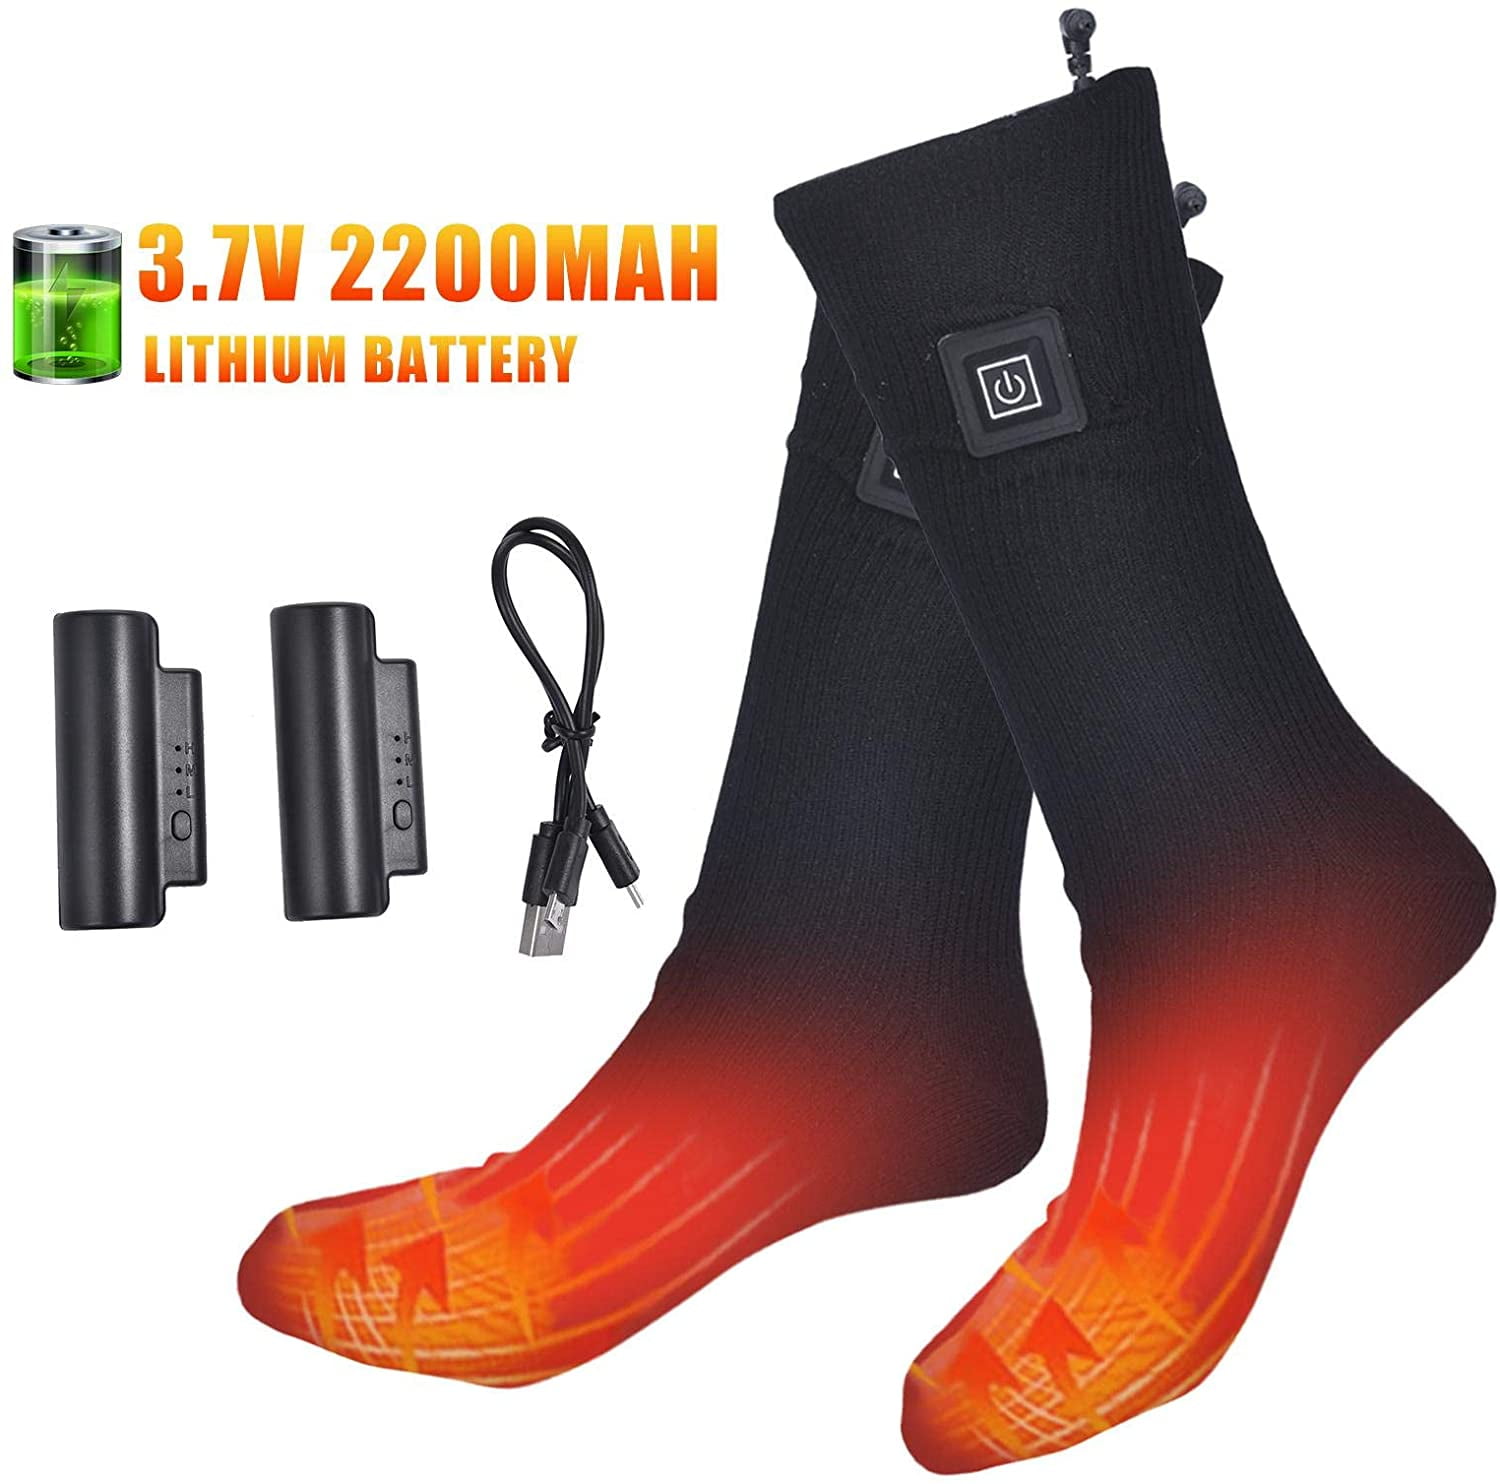 Electric Sock 2200MAH Camping Foot Warmer 3-Gear Thermal Battery Sock Heated Sock Breathable Climbing Hiking Skiing Foot Boot Warm Sock Heater for Women Men Rechargeable Winter Heating Cotton Sock for Outdoor Sports 